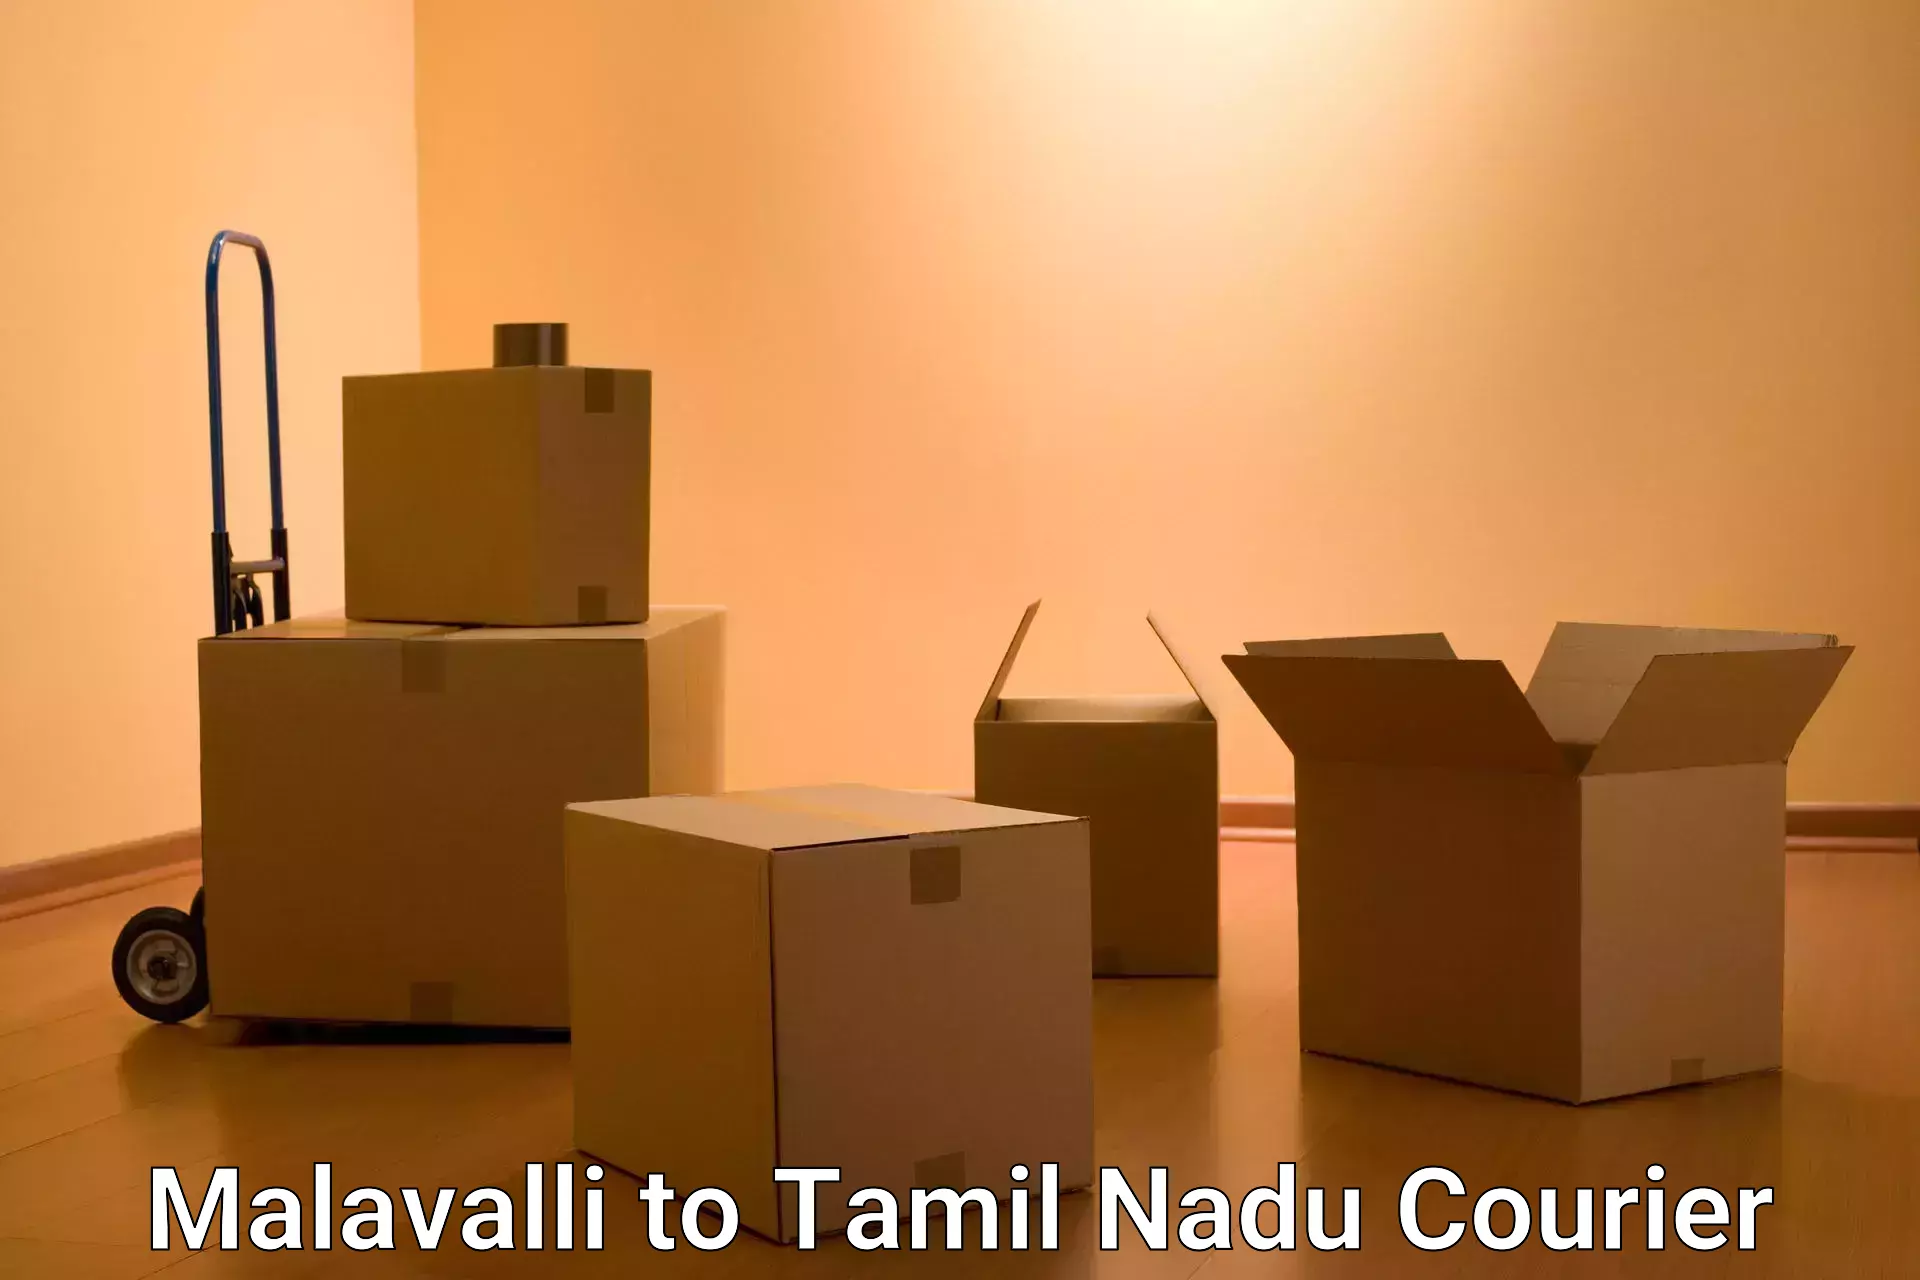 Reliable delivery network Malavalli to Tamil Nadu